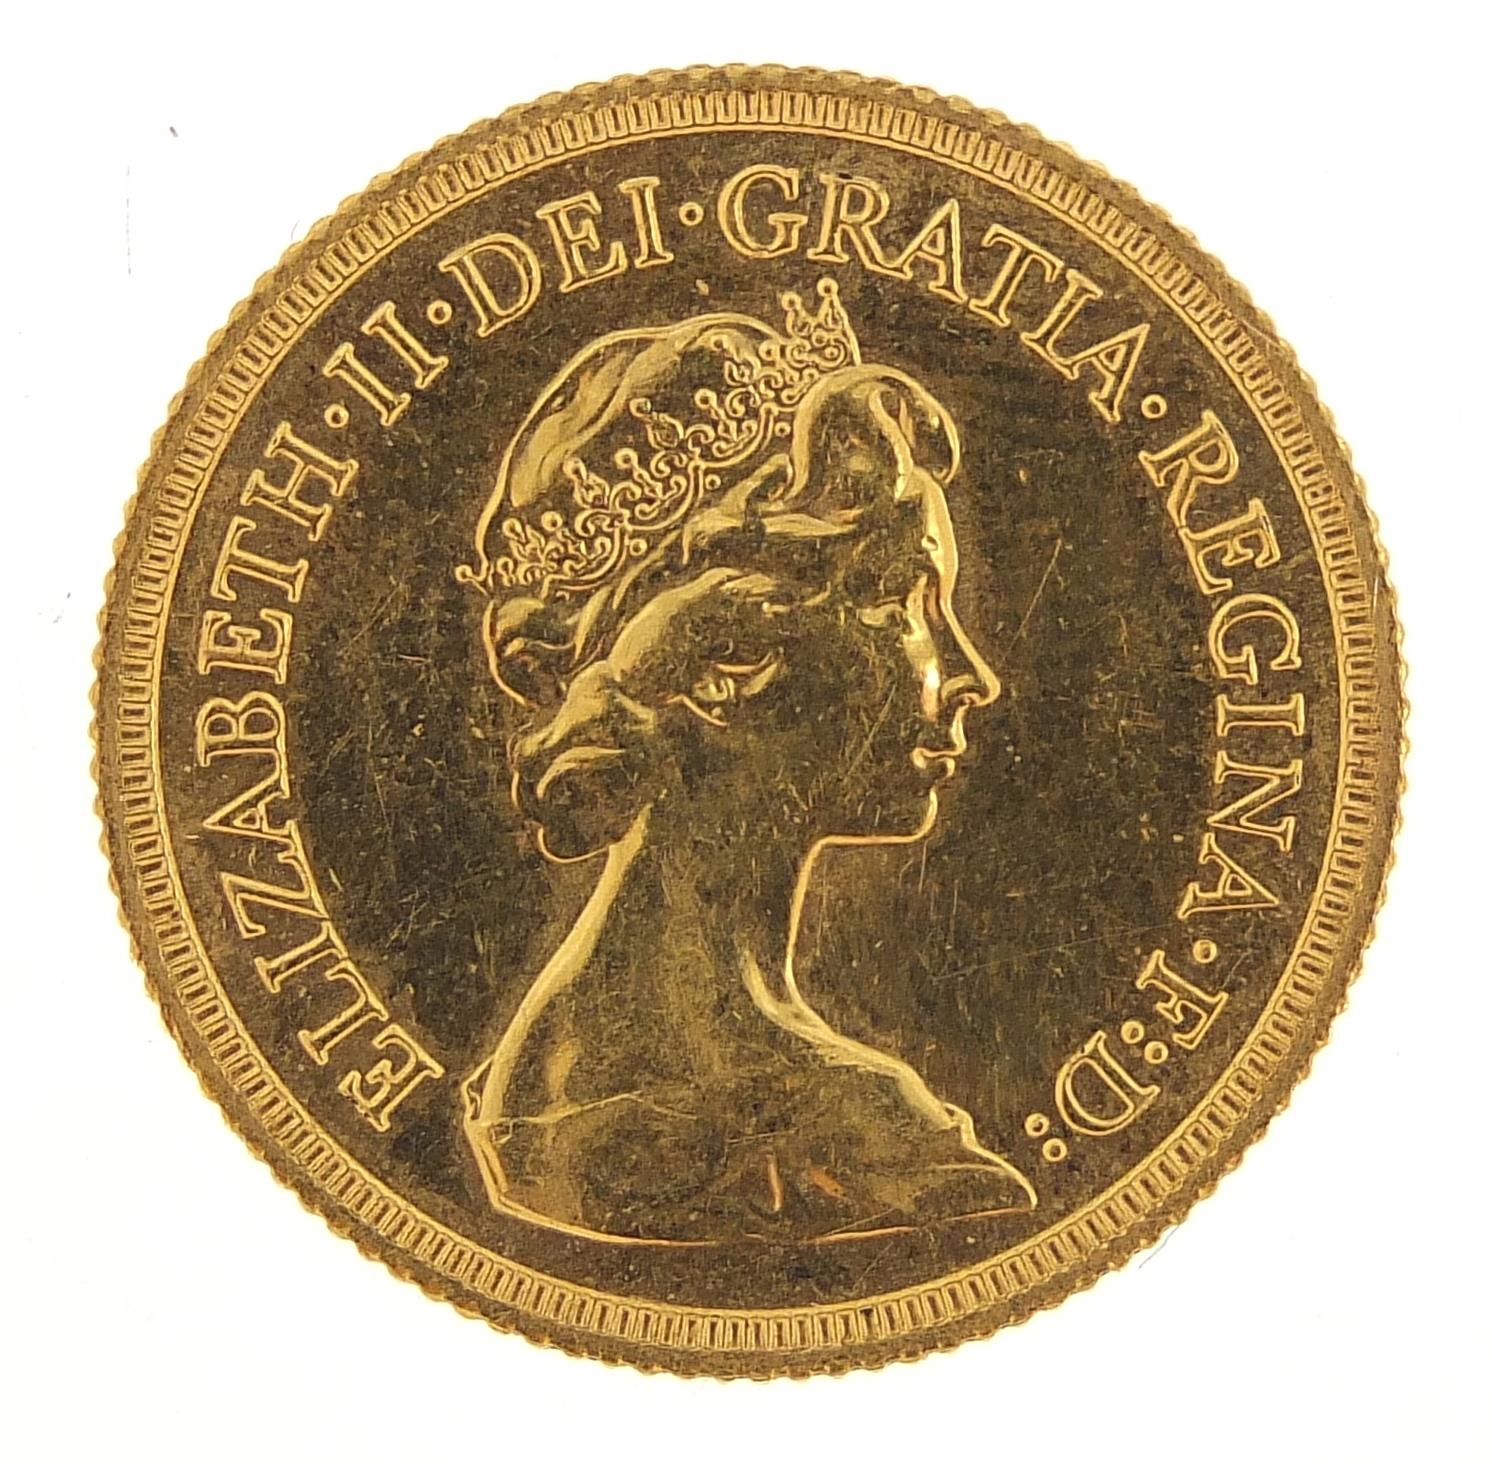 Elizabeth II 1982 gold sovereign - this lot is sold without buyer's premium - Image 2 of 3